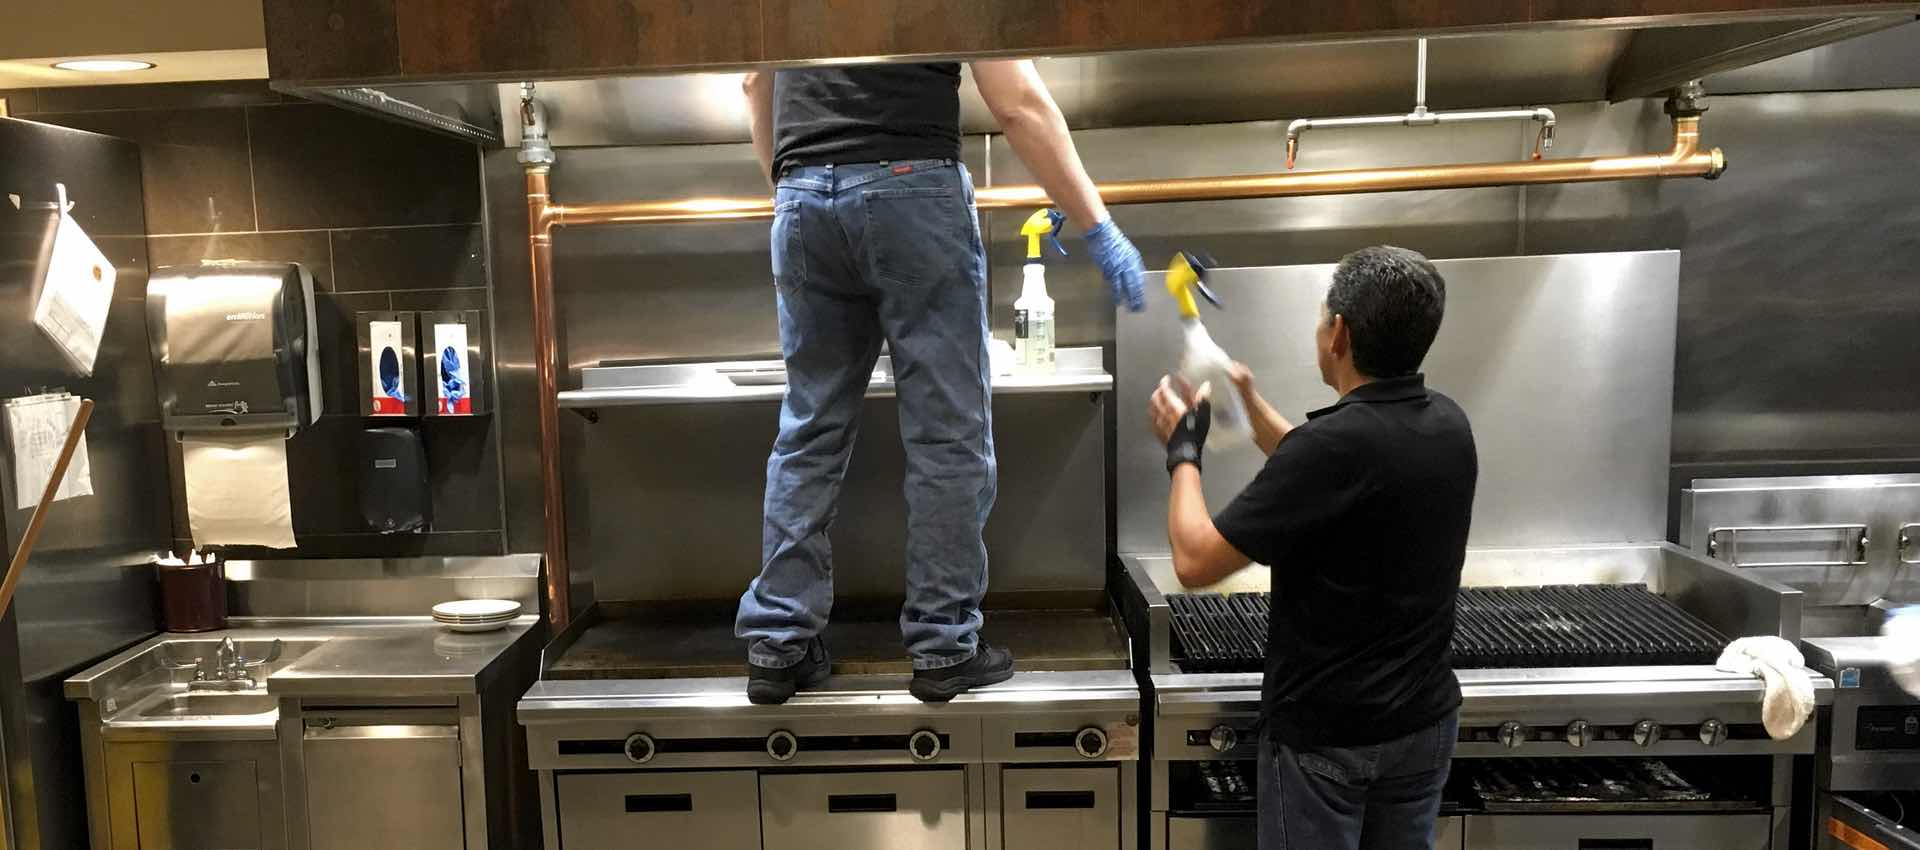 Range Hood Maintenance: 7 Tips to Care for Your Kitchen Vent Hood